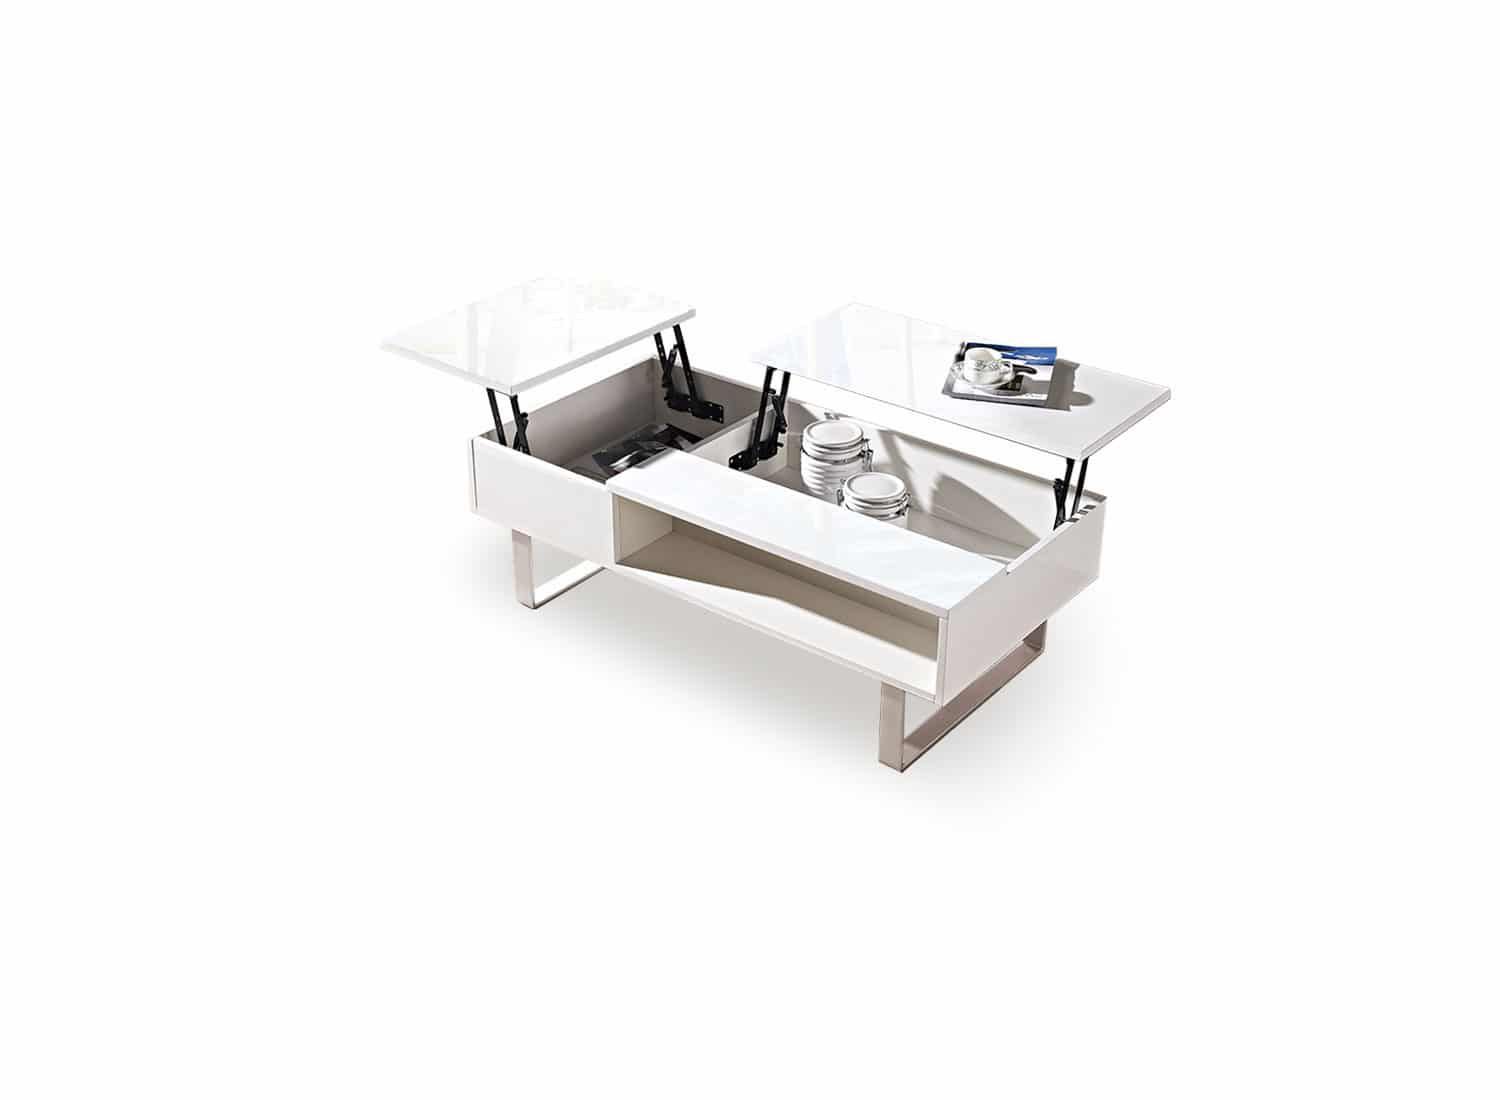 Occam Coffee Table With Lift Top | Expand Furniture Within Lift Top Storage Coffee Tables (View 10 of 20)